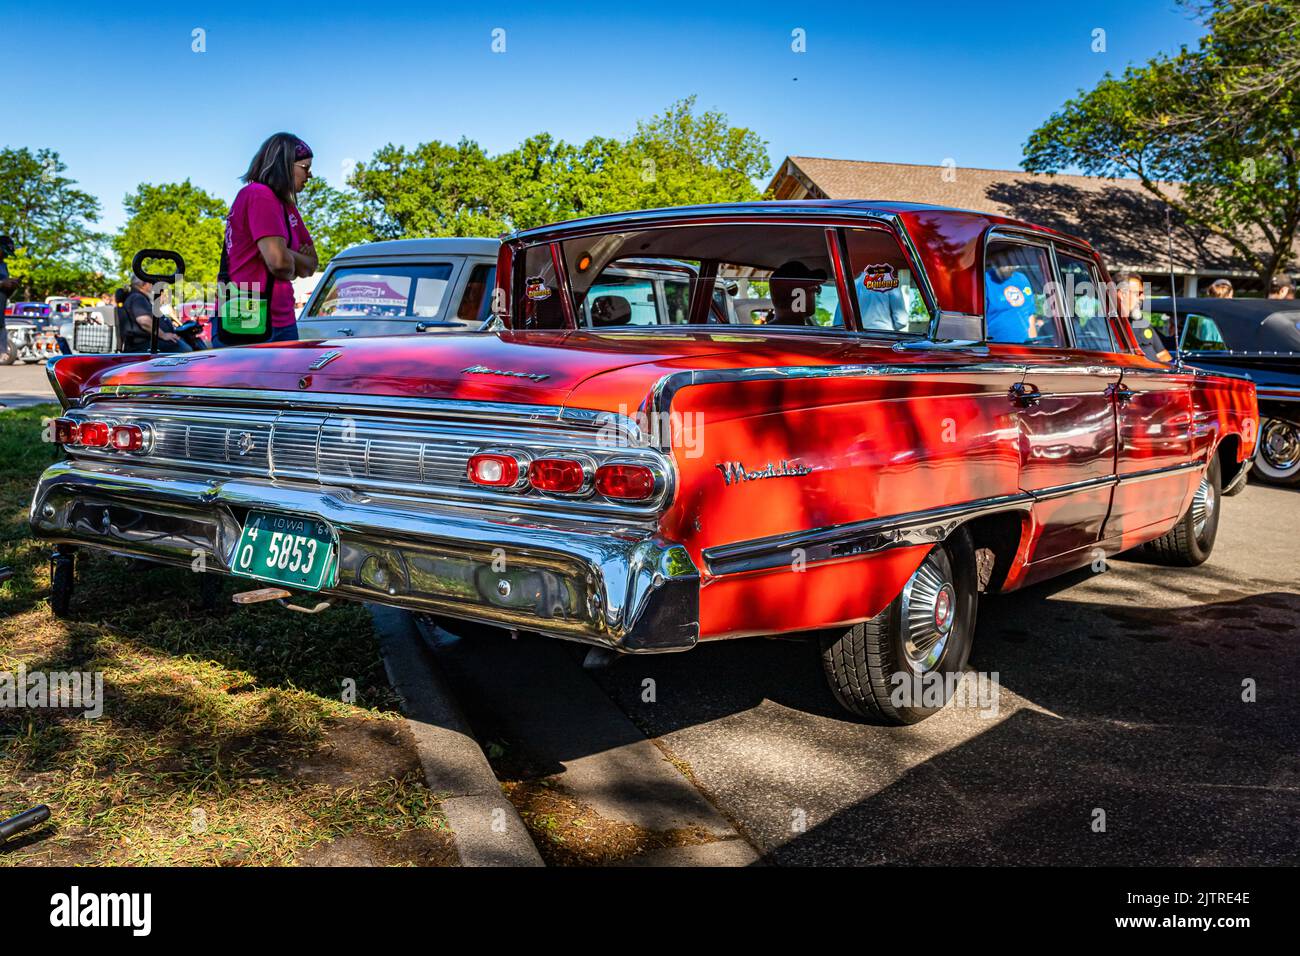 Falcon Heights, MN - June 17, 2022: Low perspective rear corner view of a 1964 Mercury Montclair Breezeway Sedan at a local car show. Stock Photo